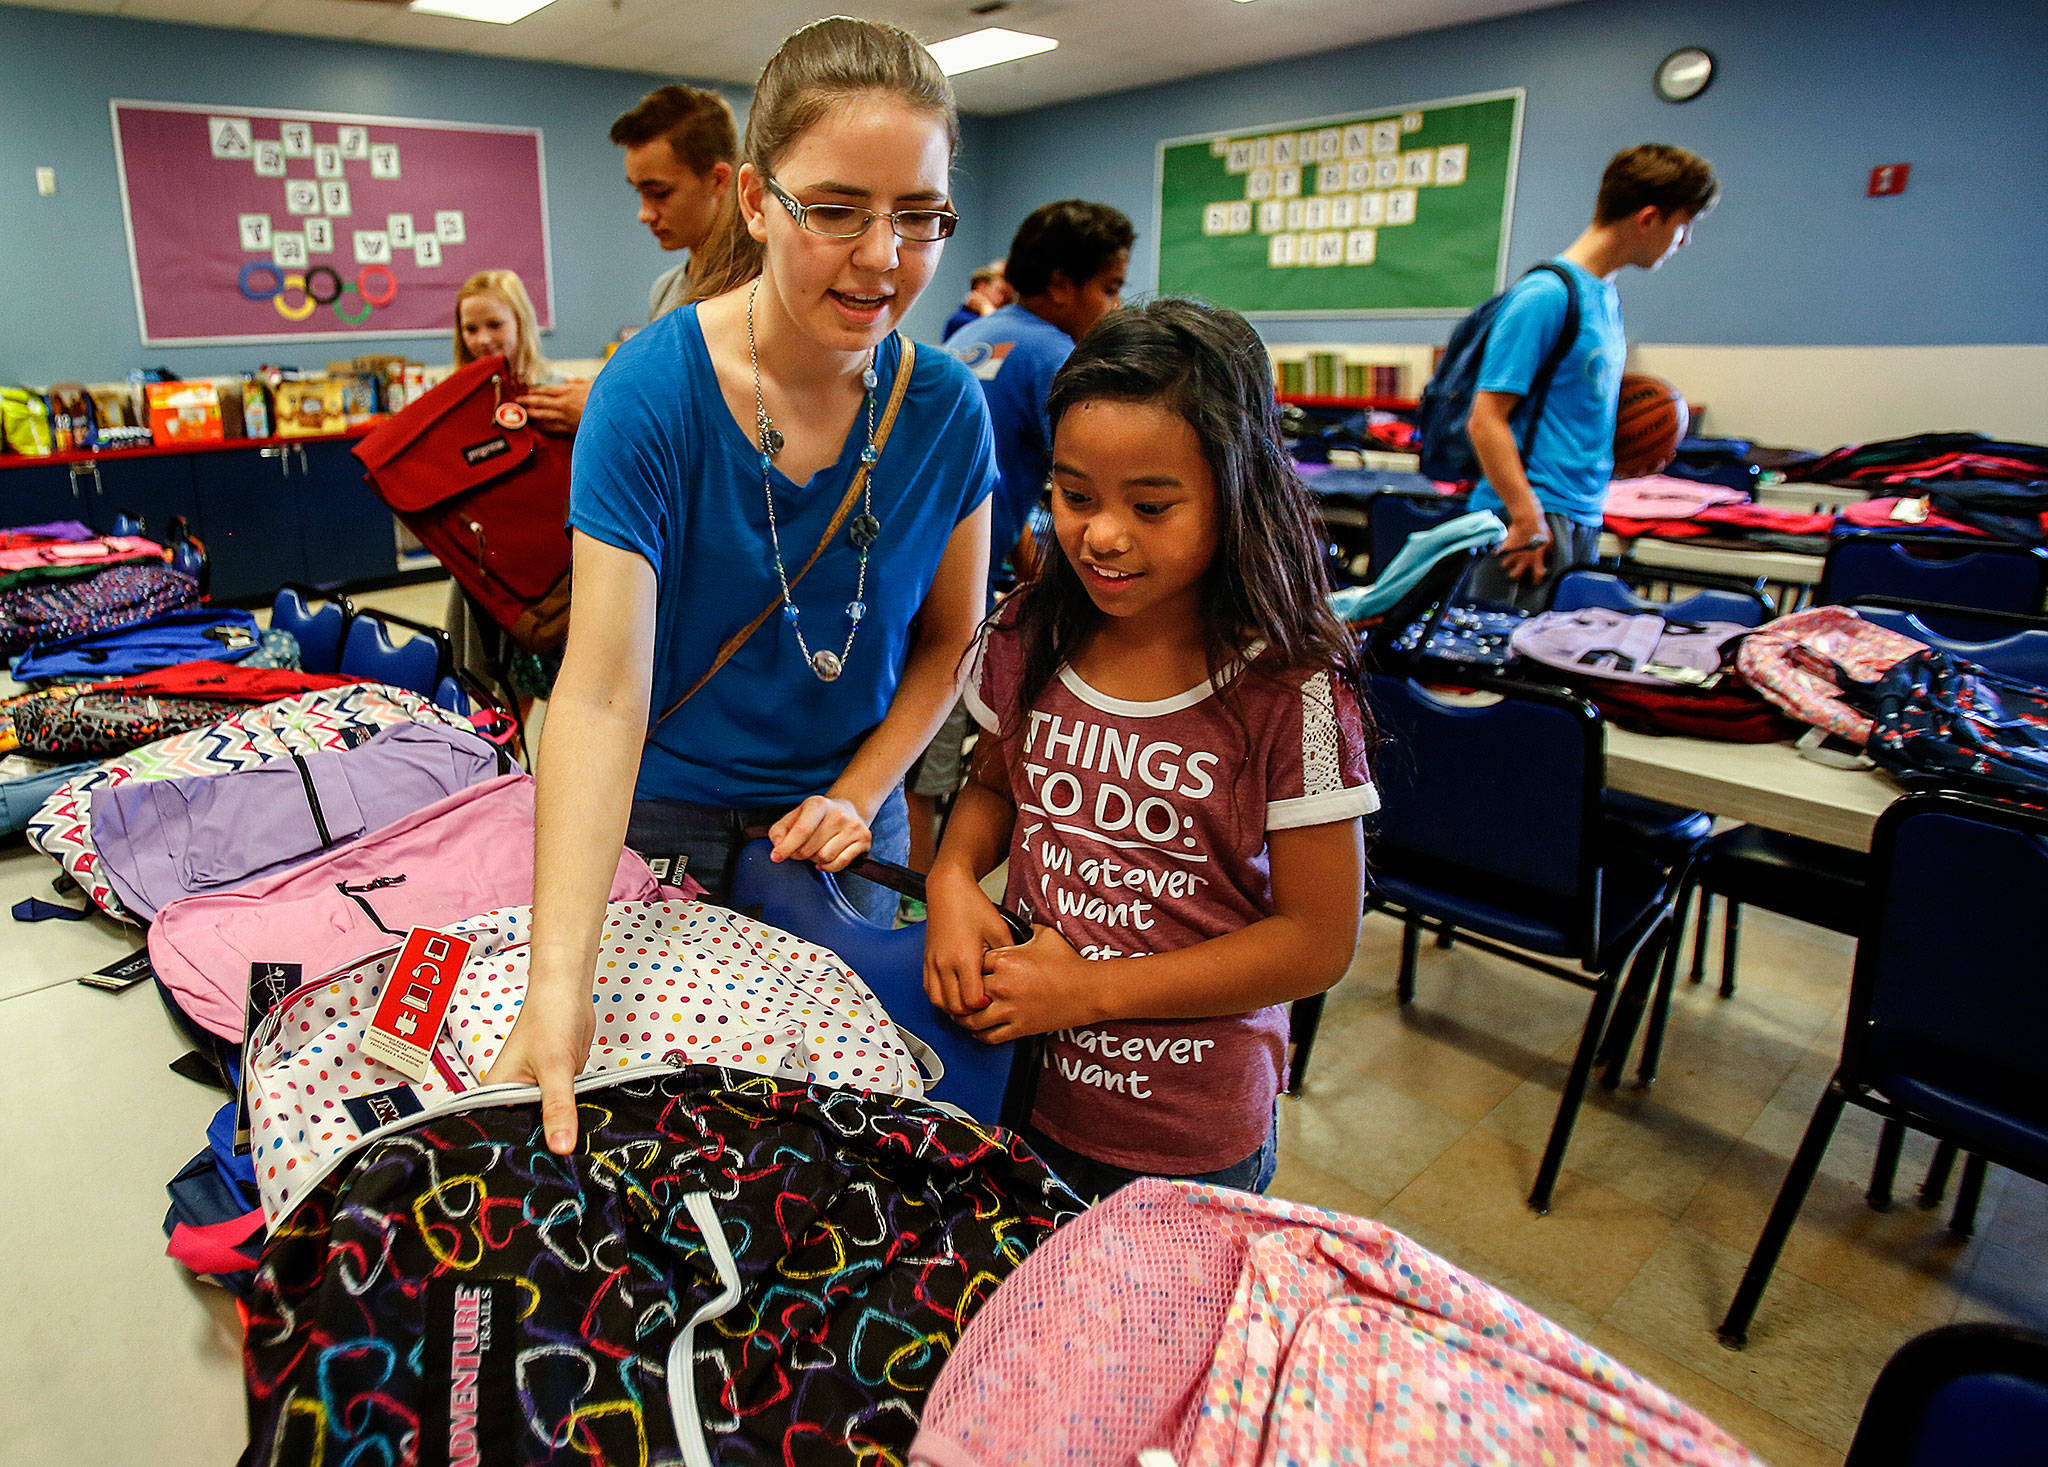 Rachel Preston helps Jailey Henson, 10, pick out a brand new backpack for school Thursday at the Everett Boys & Girls Club. Preston recently joined a new Rotary club for young people wanting to get involved and help out in the community. (Dan Bates / The Herald)